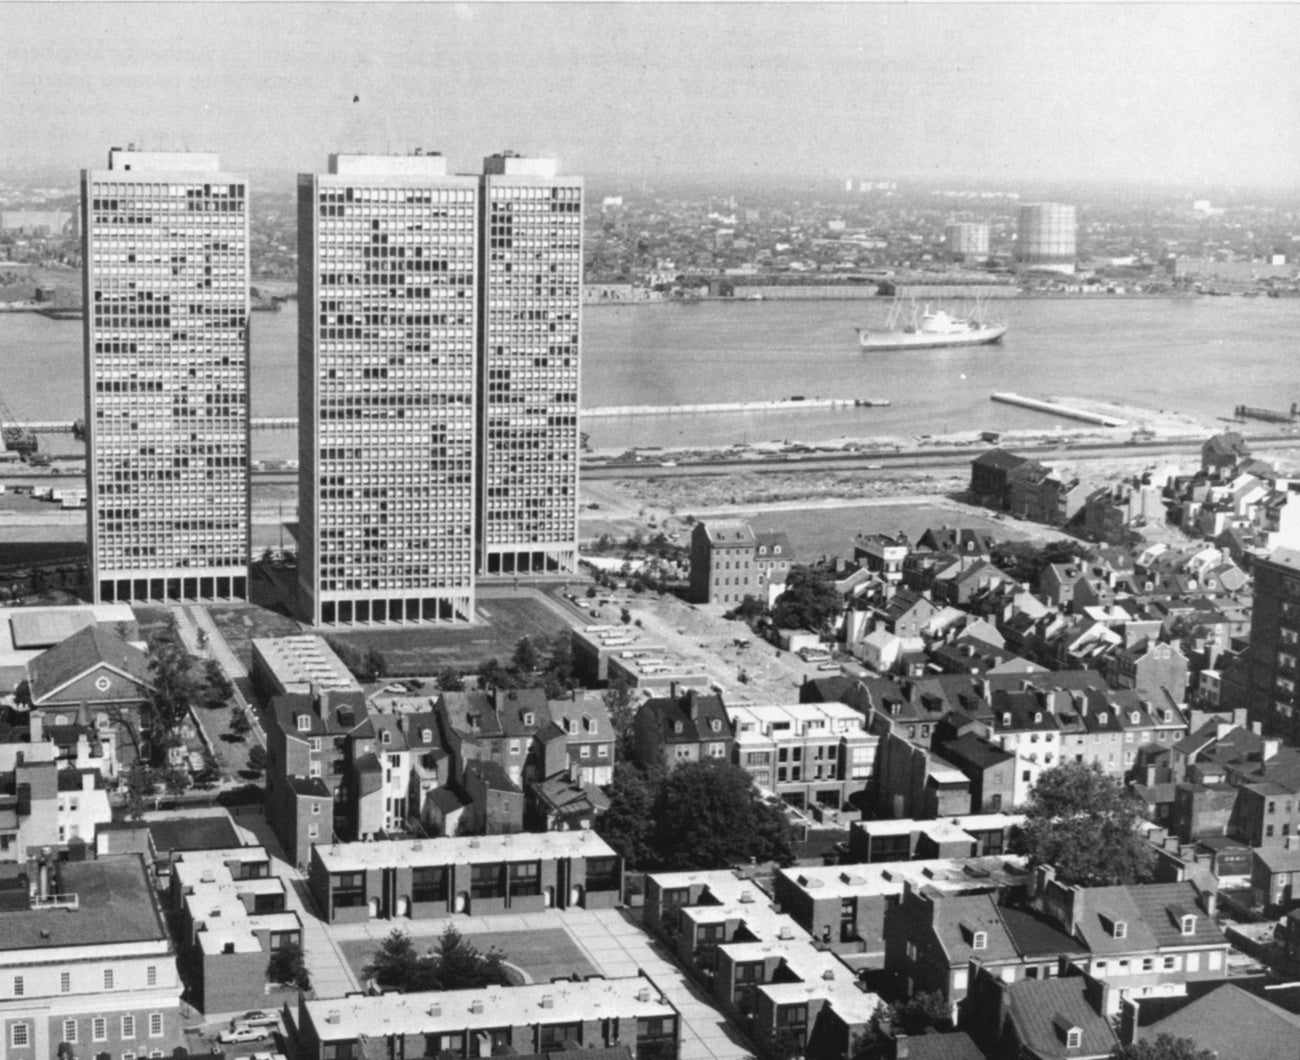 Society Hill Towers, 1969 | From DVRPC, “A Report on Historic Preservation” (1969). Courtesy of the Edmund N. Bacon Collection, The Architectural Archives, University of Pennsylvania. 